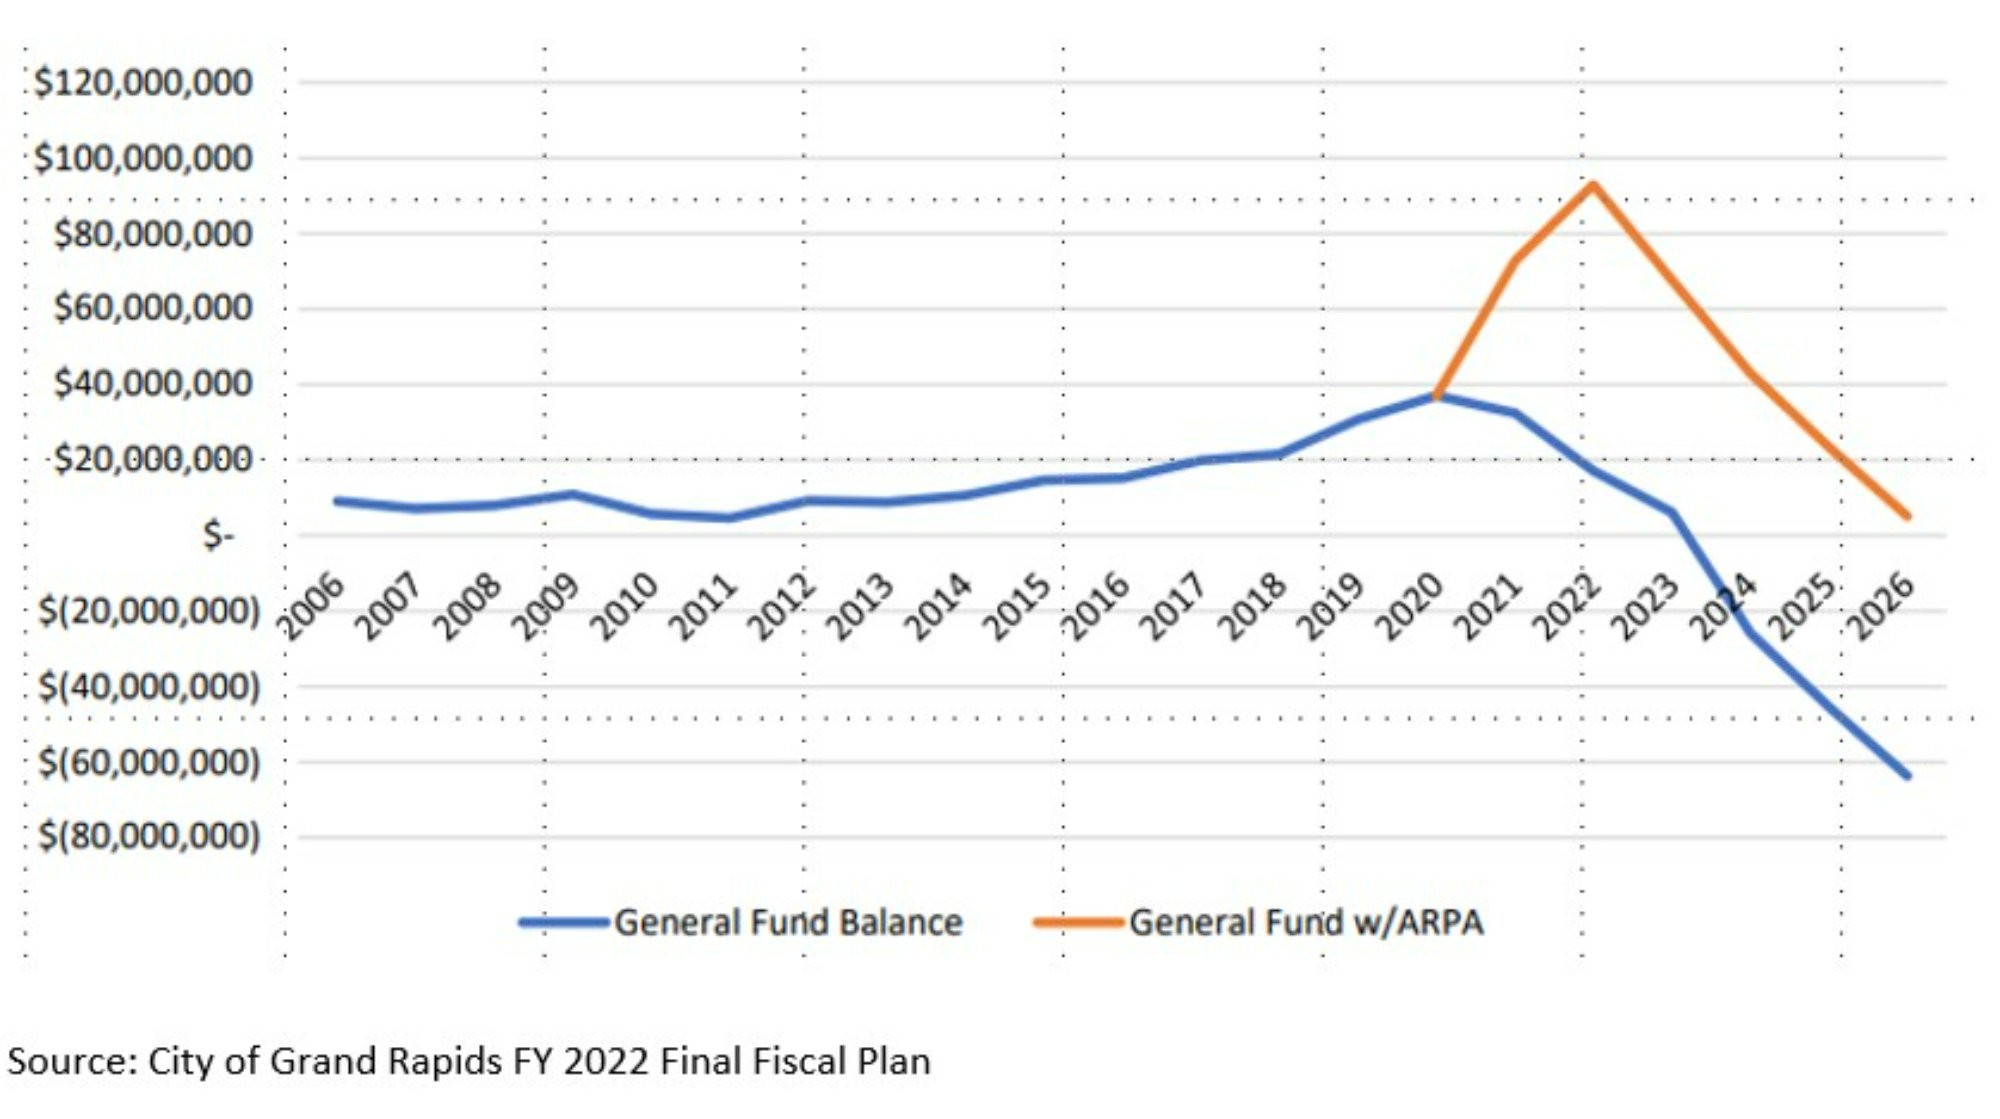 General Fun Performance and Projections from Fiscal Plan FY 2022 showing the impact on the City of Grand Rapids